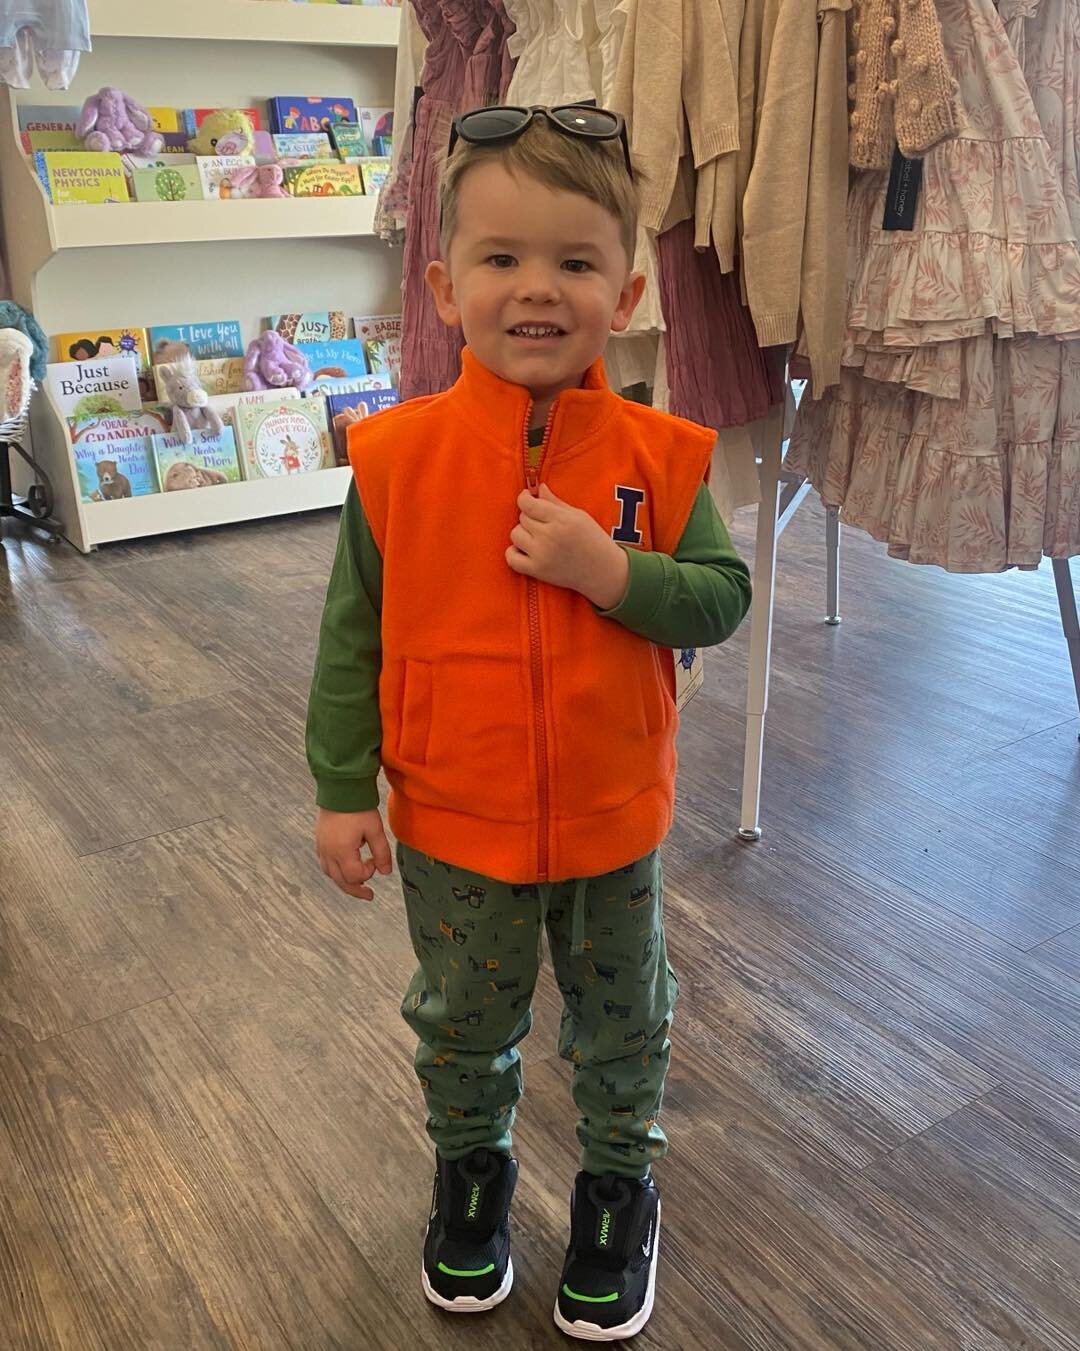 Represent your favorite team no matter the season with our ever growing collegiate collection! 

Thank you, mama, for sharing this sweet photo of your little shopper. 🥰

#shopsmall #shoplocal #ababynaturally #babyboutique #supportsmallbusiness